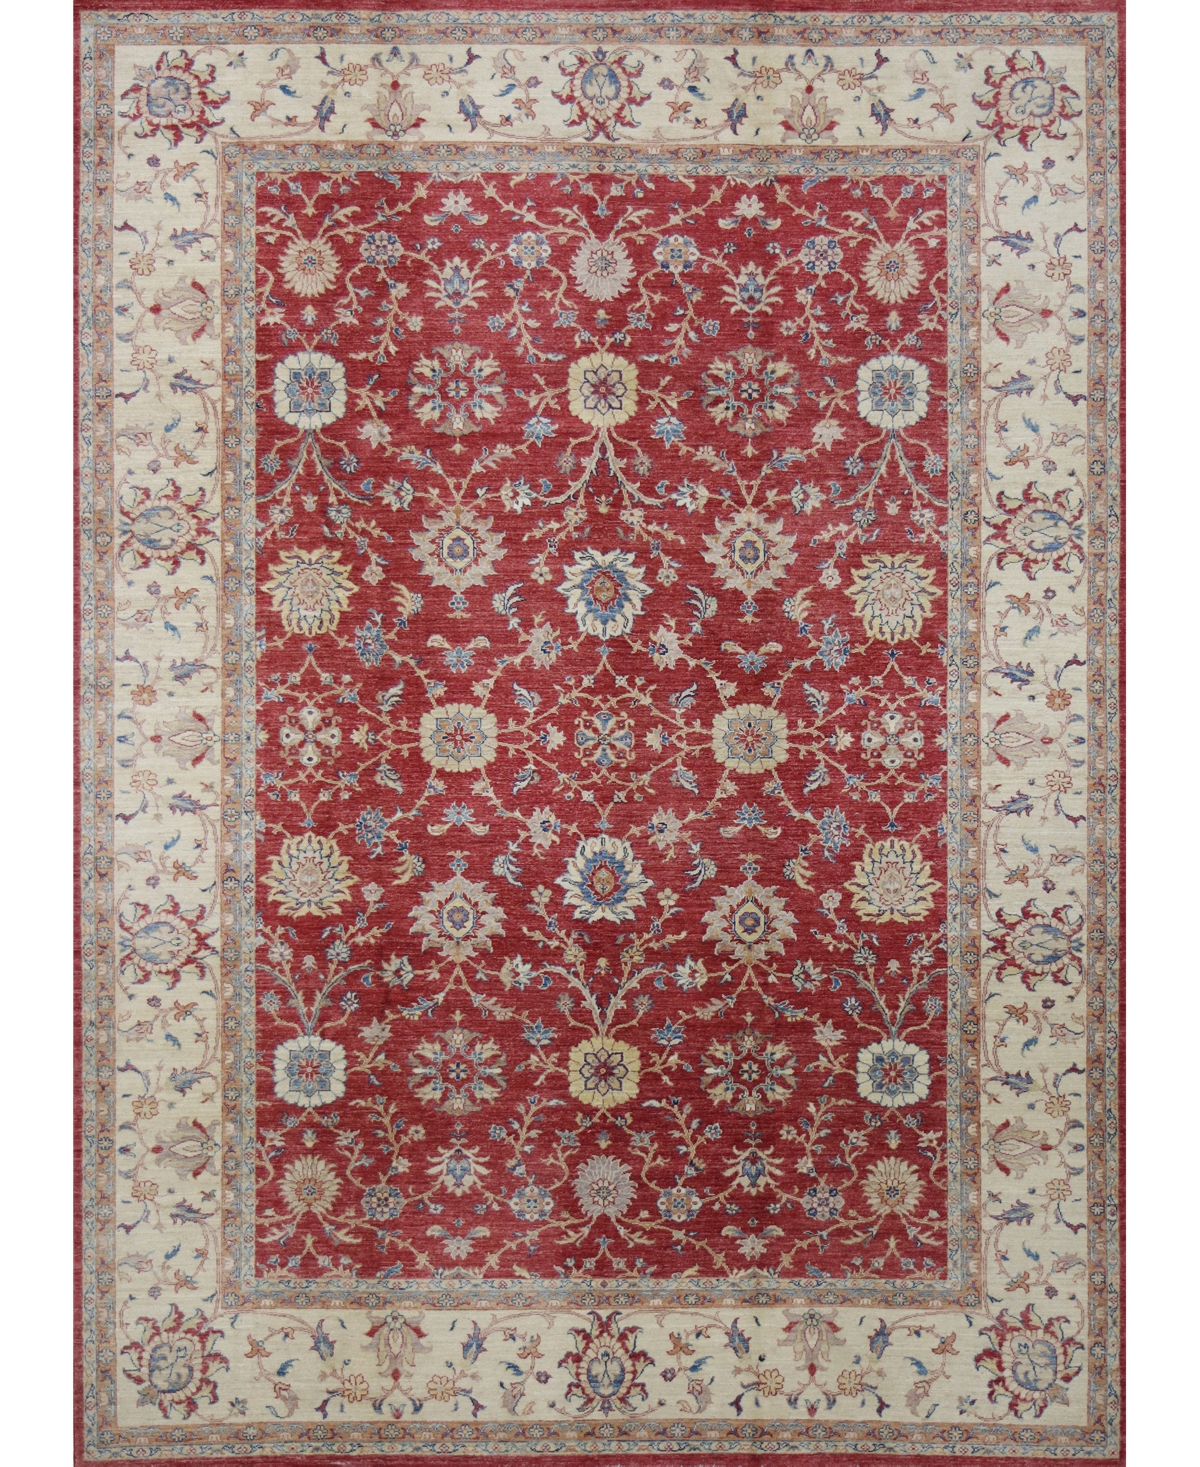 Bb Rugs One of a Kind Mansehra 8'3in x 11'7in Area Rug - Red